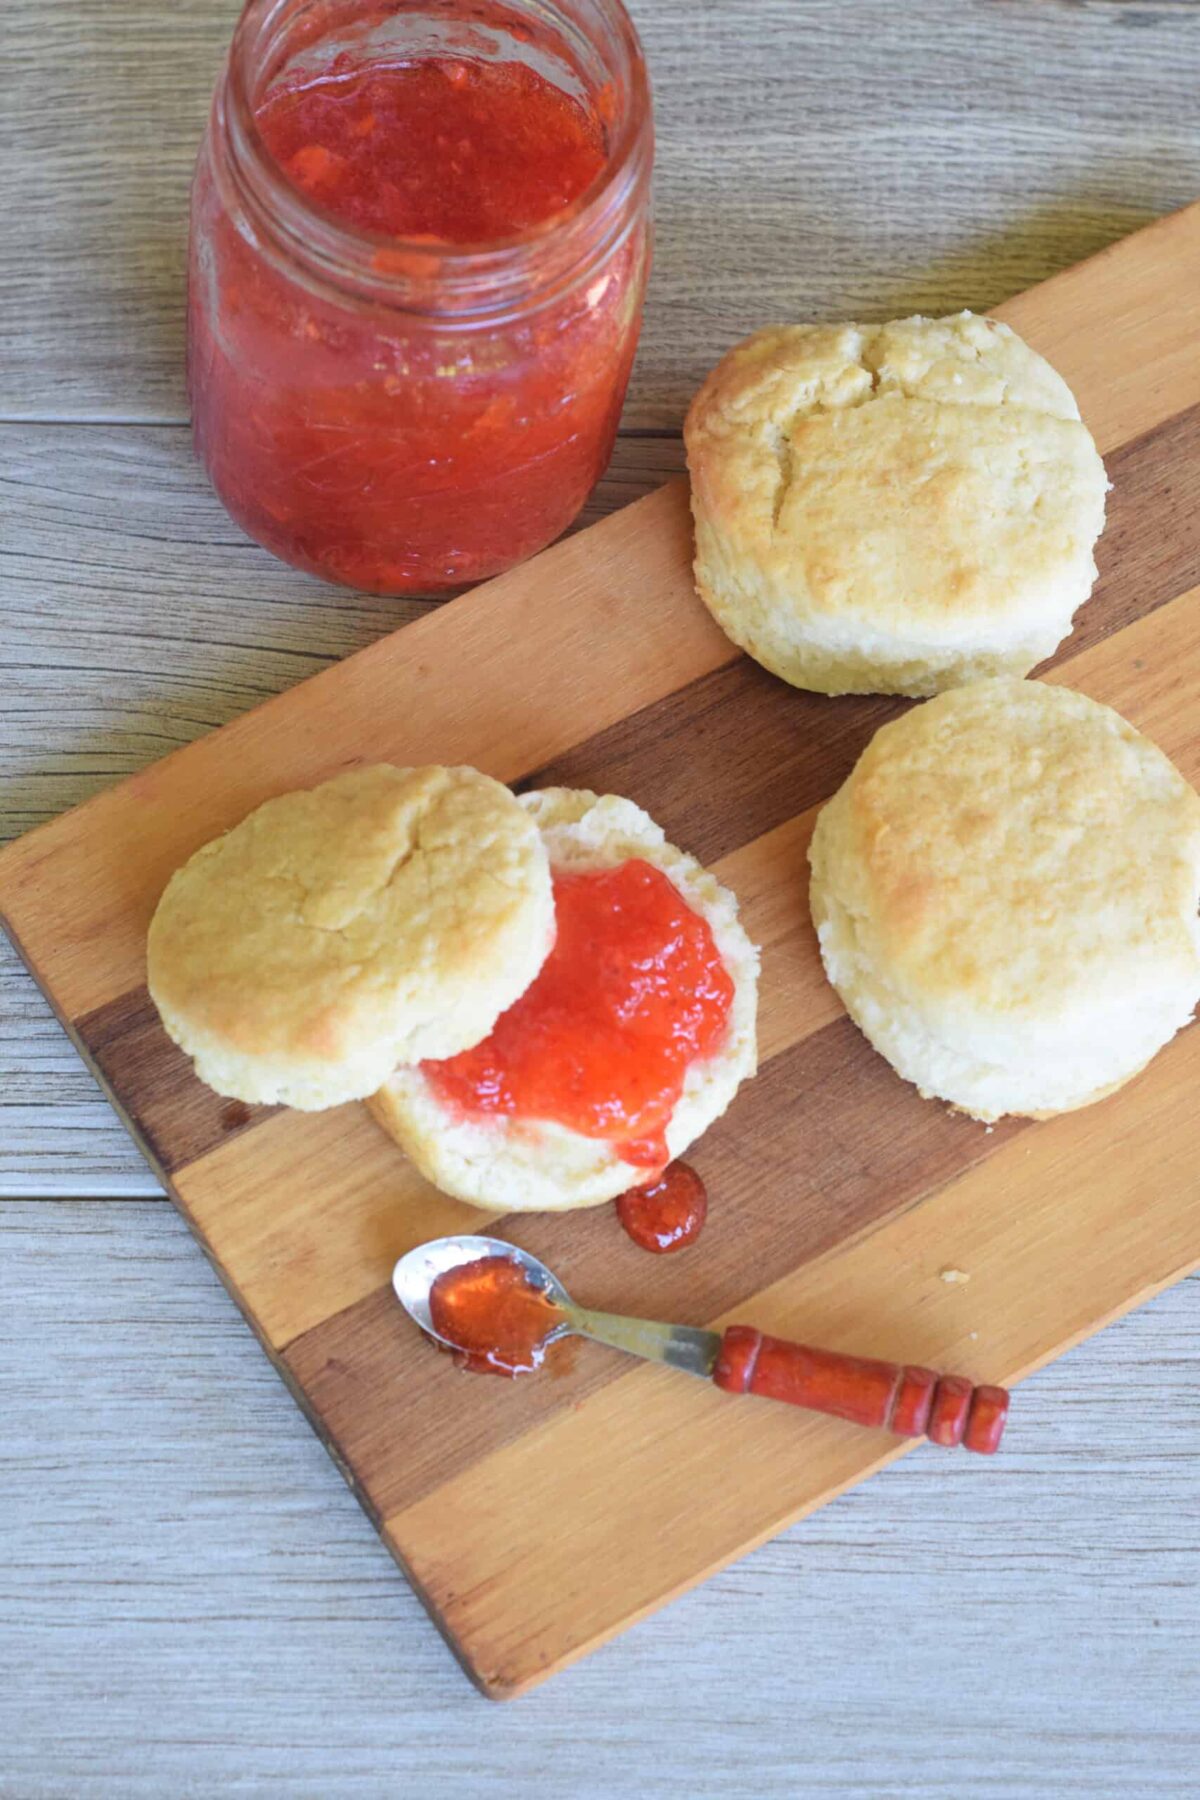 Strawberry Freezer Jam spread on 2 Ingredient Biscuits with jam spilling out of a little wooden spoon on a wooden cutting board.